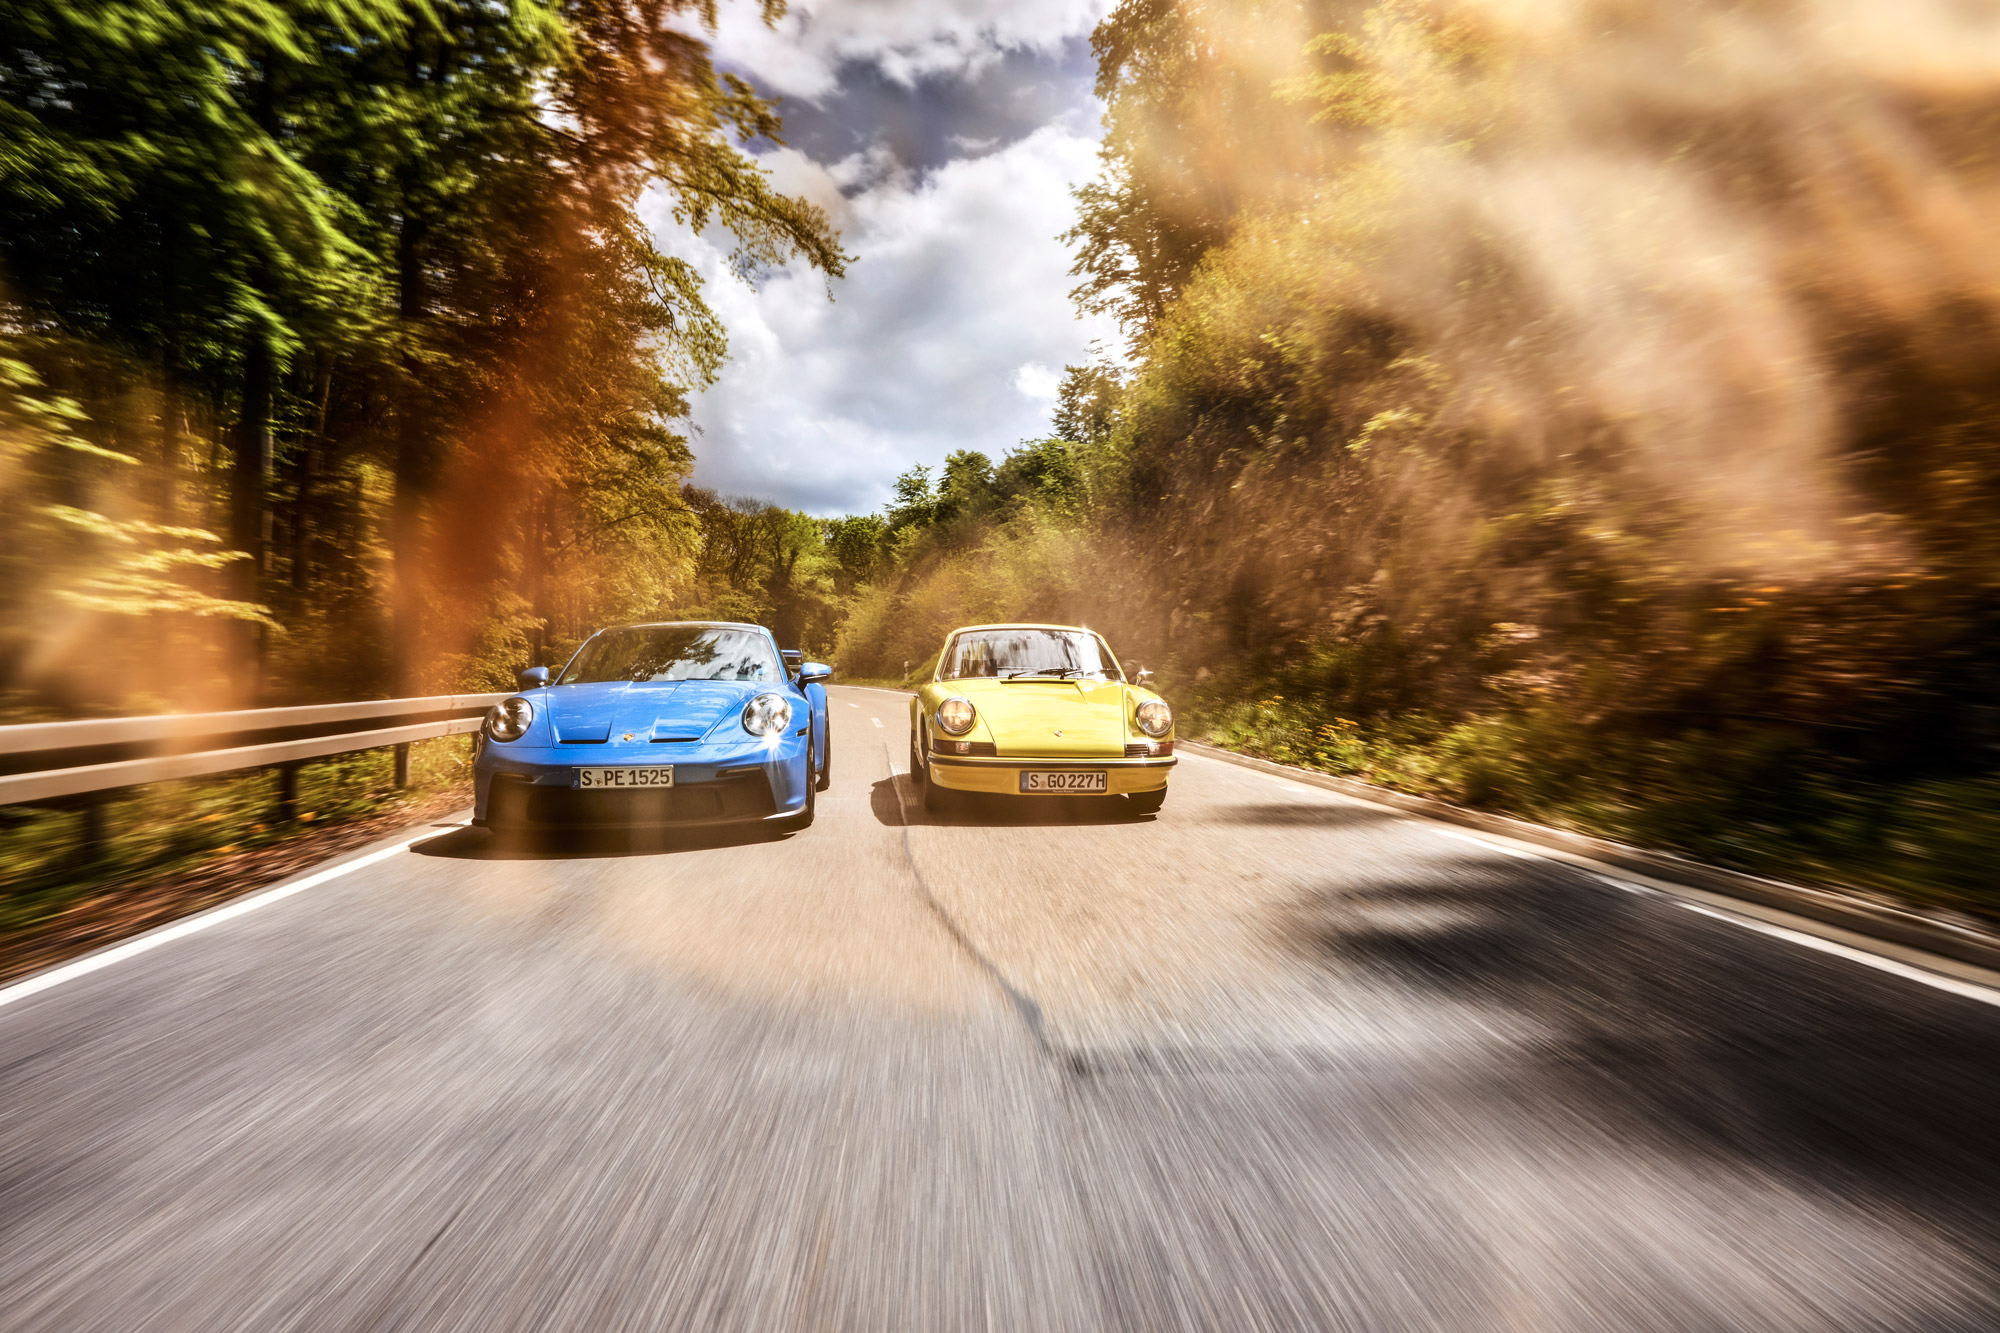 Porsche 911 GT3 and 911 RS 2.7 on the road